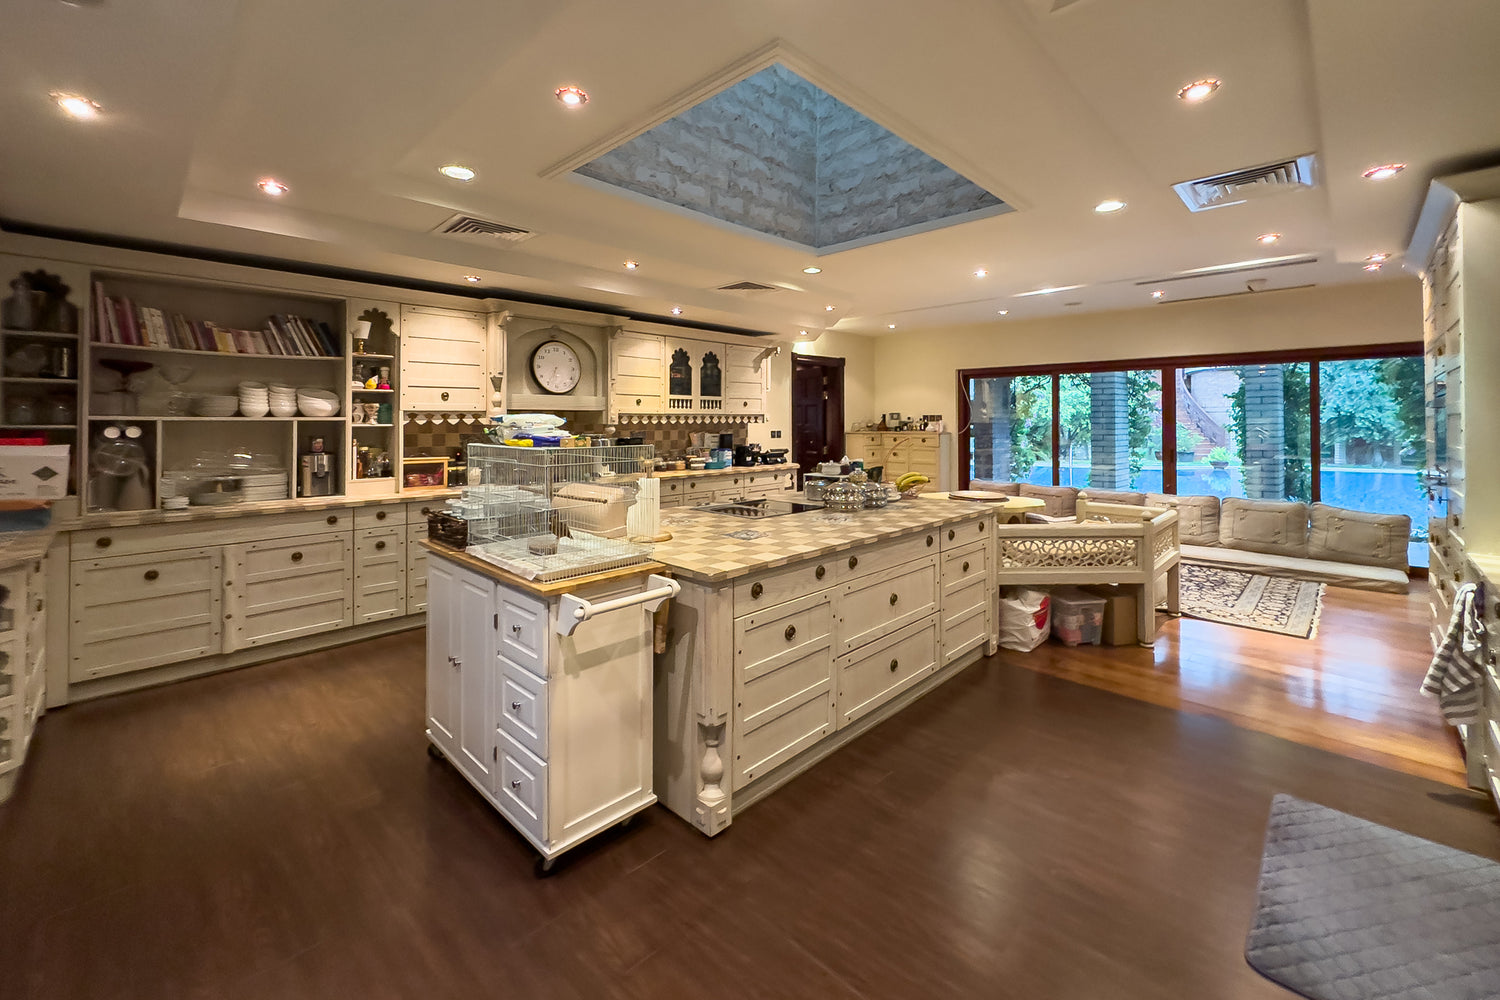 Large kitchen with white design